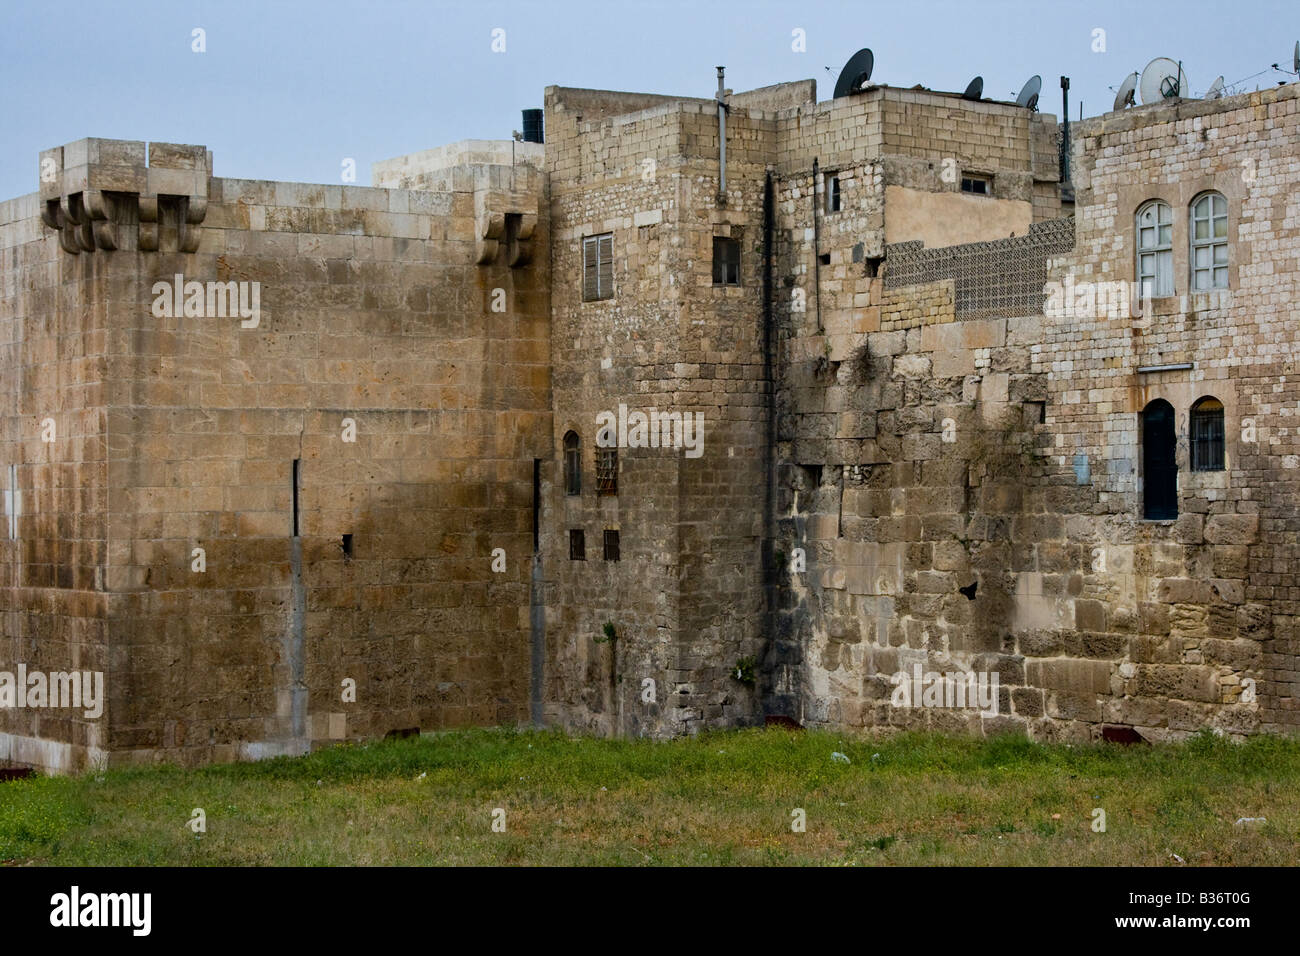 Old City Walls in Aleppo Syria Stock Photo